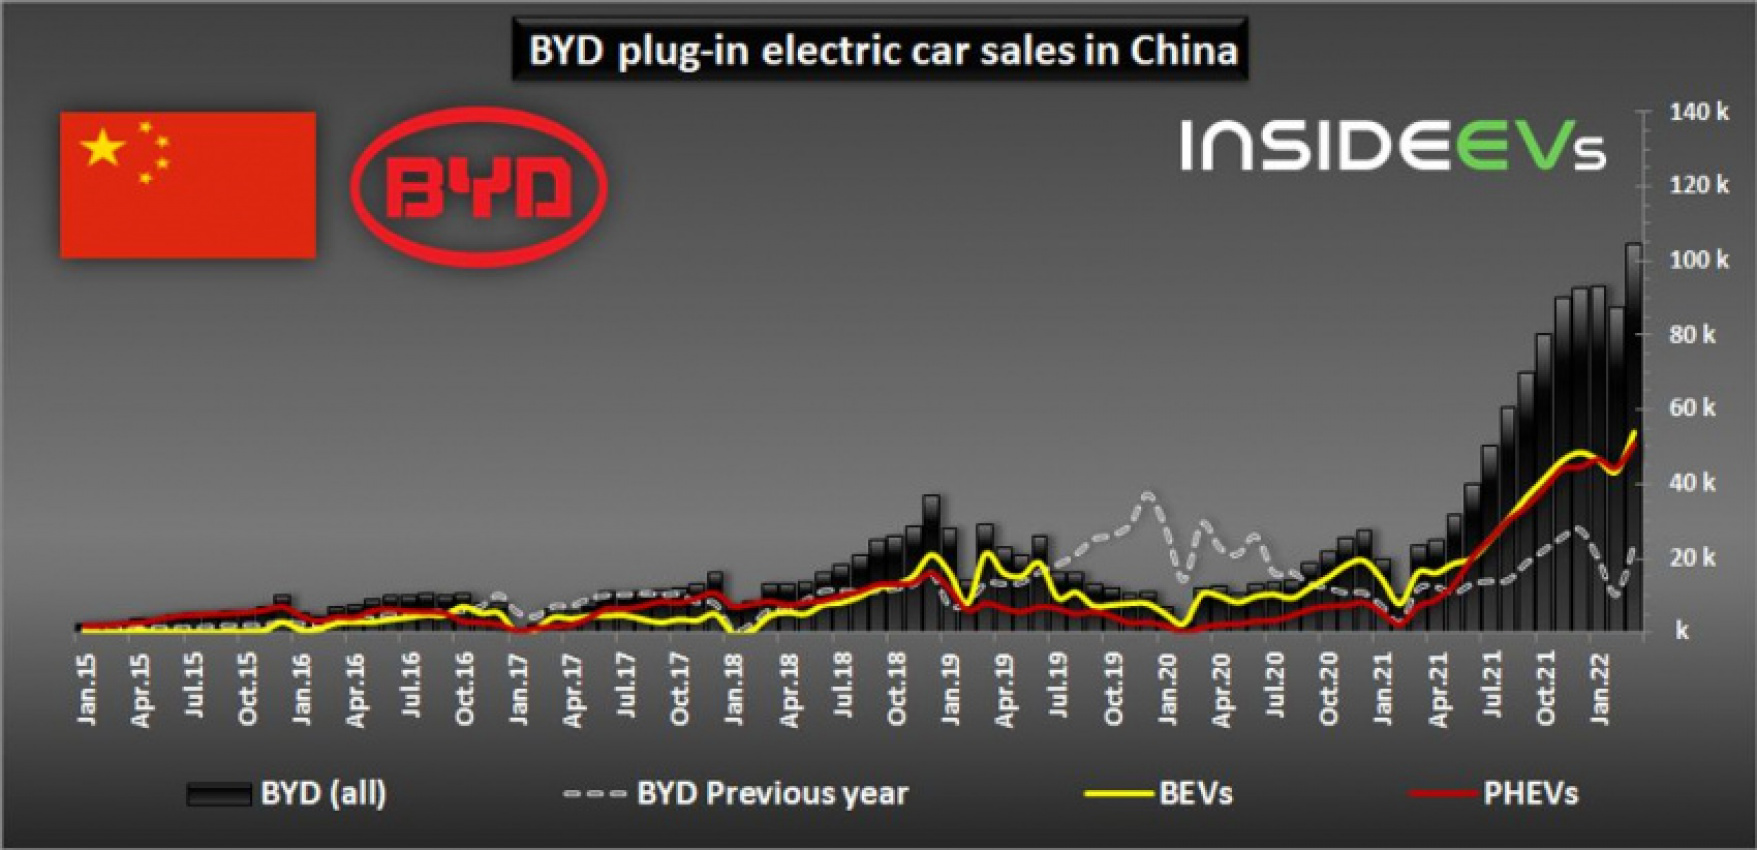 autos, byd, cars, evs, china: in march byd plug-in car sales exceeded 100,000